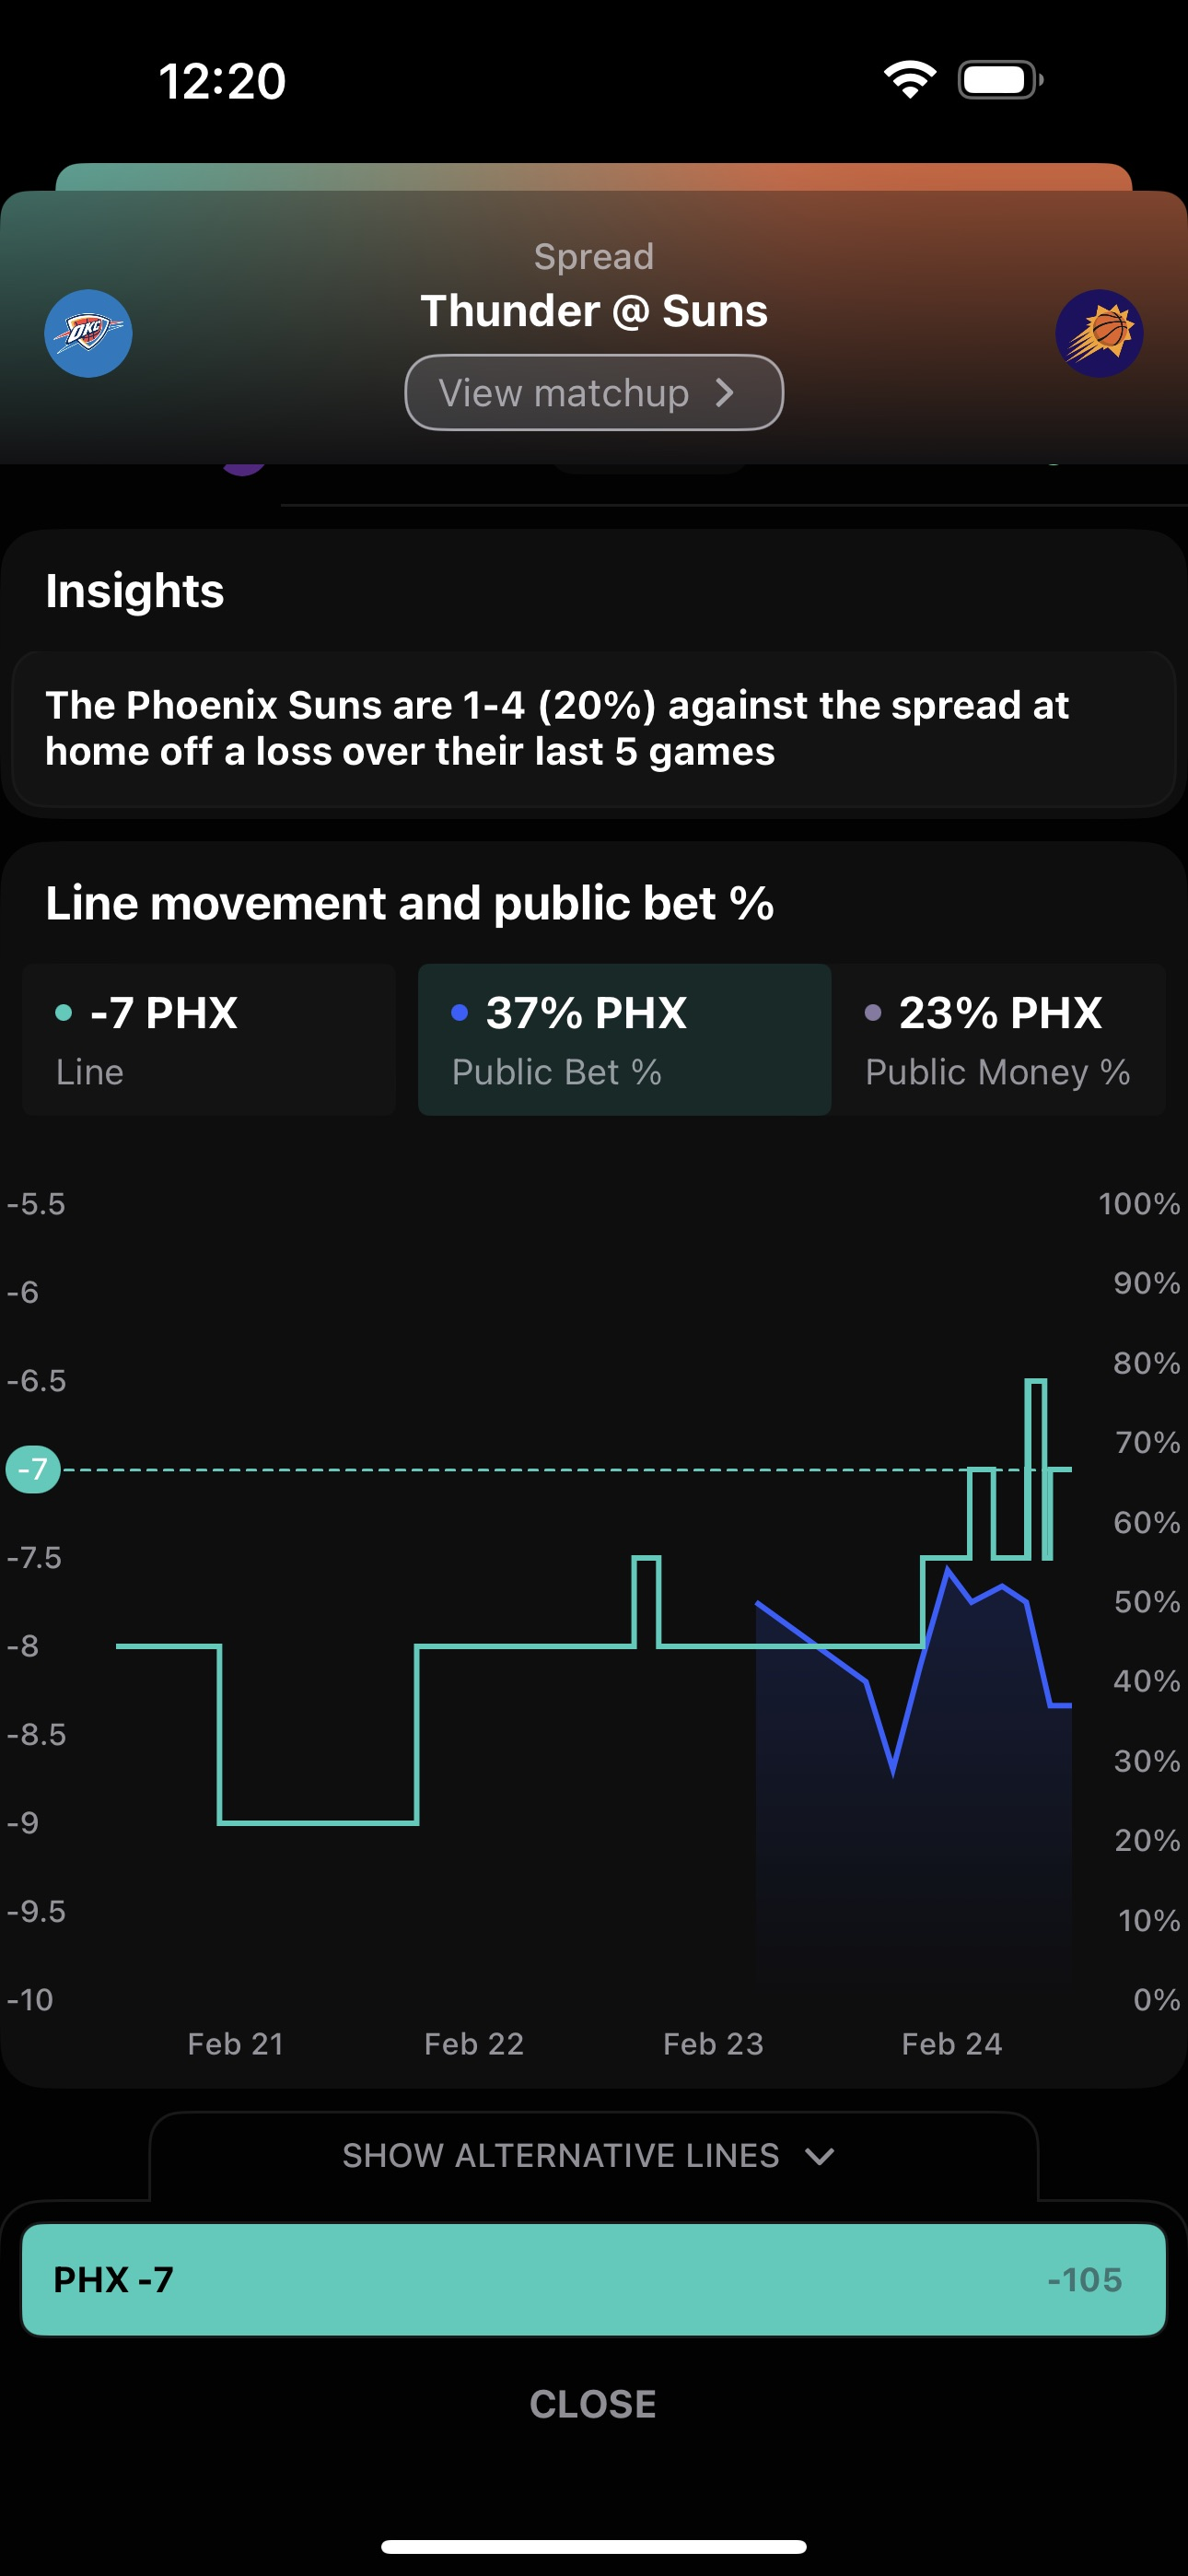 Track line movement, public betting percentages and more with Outliers sports betting platform